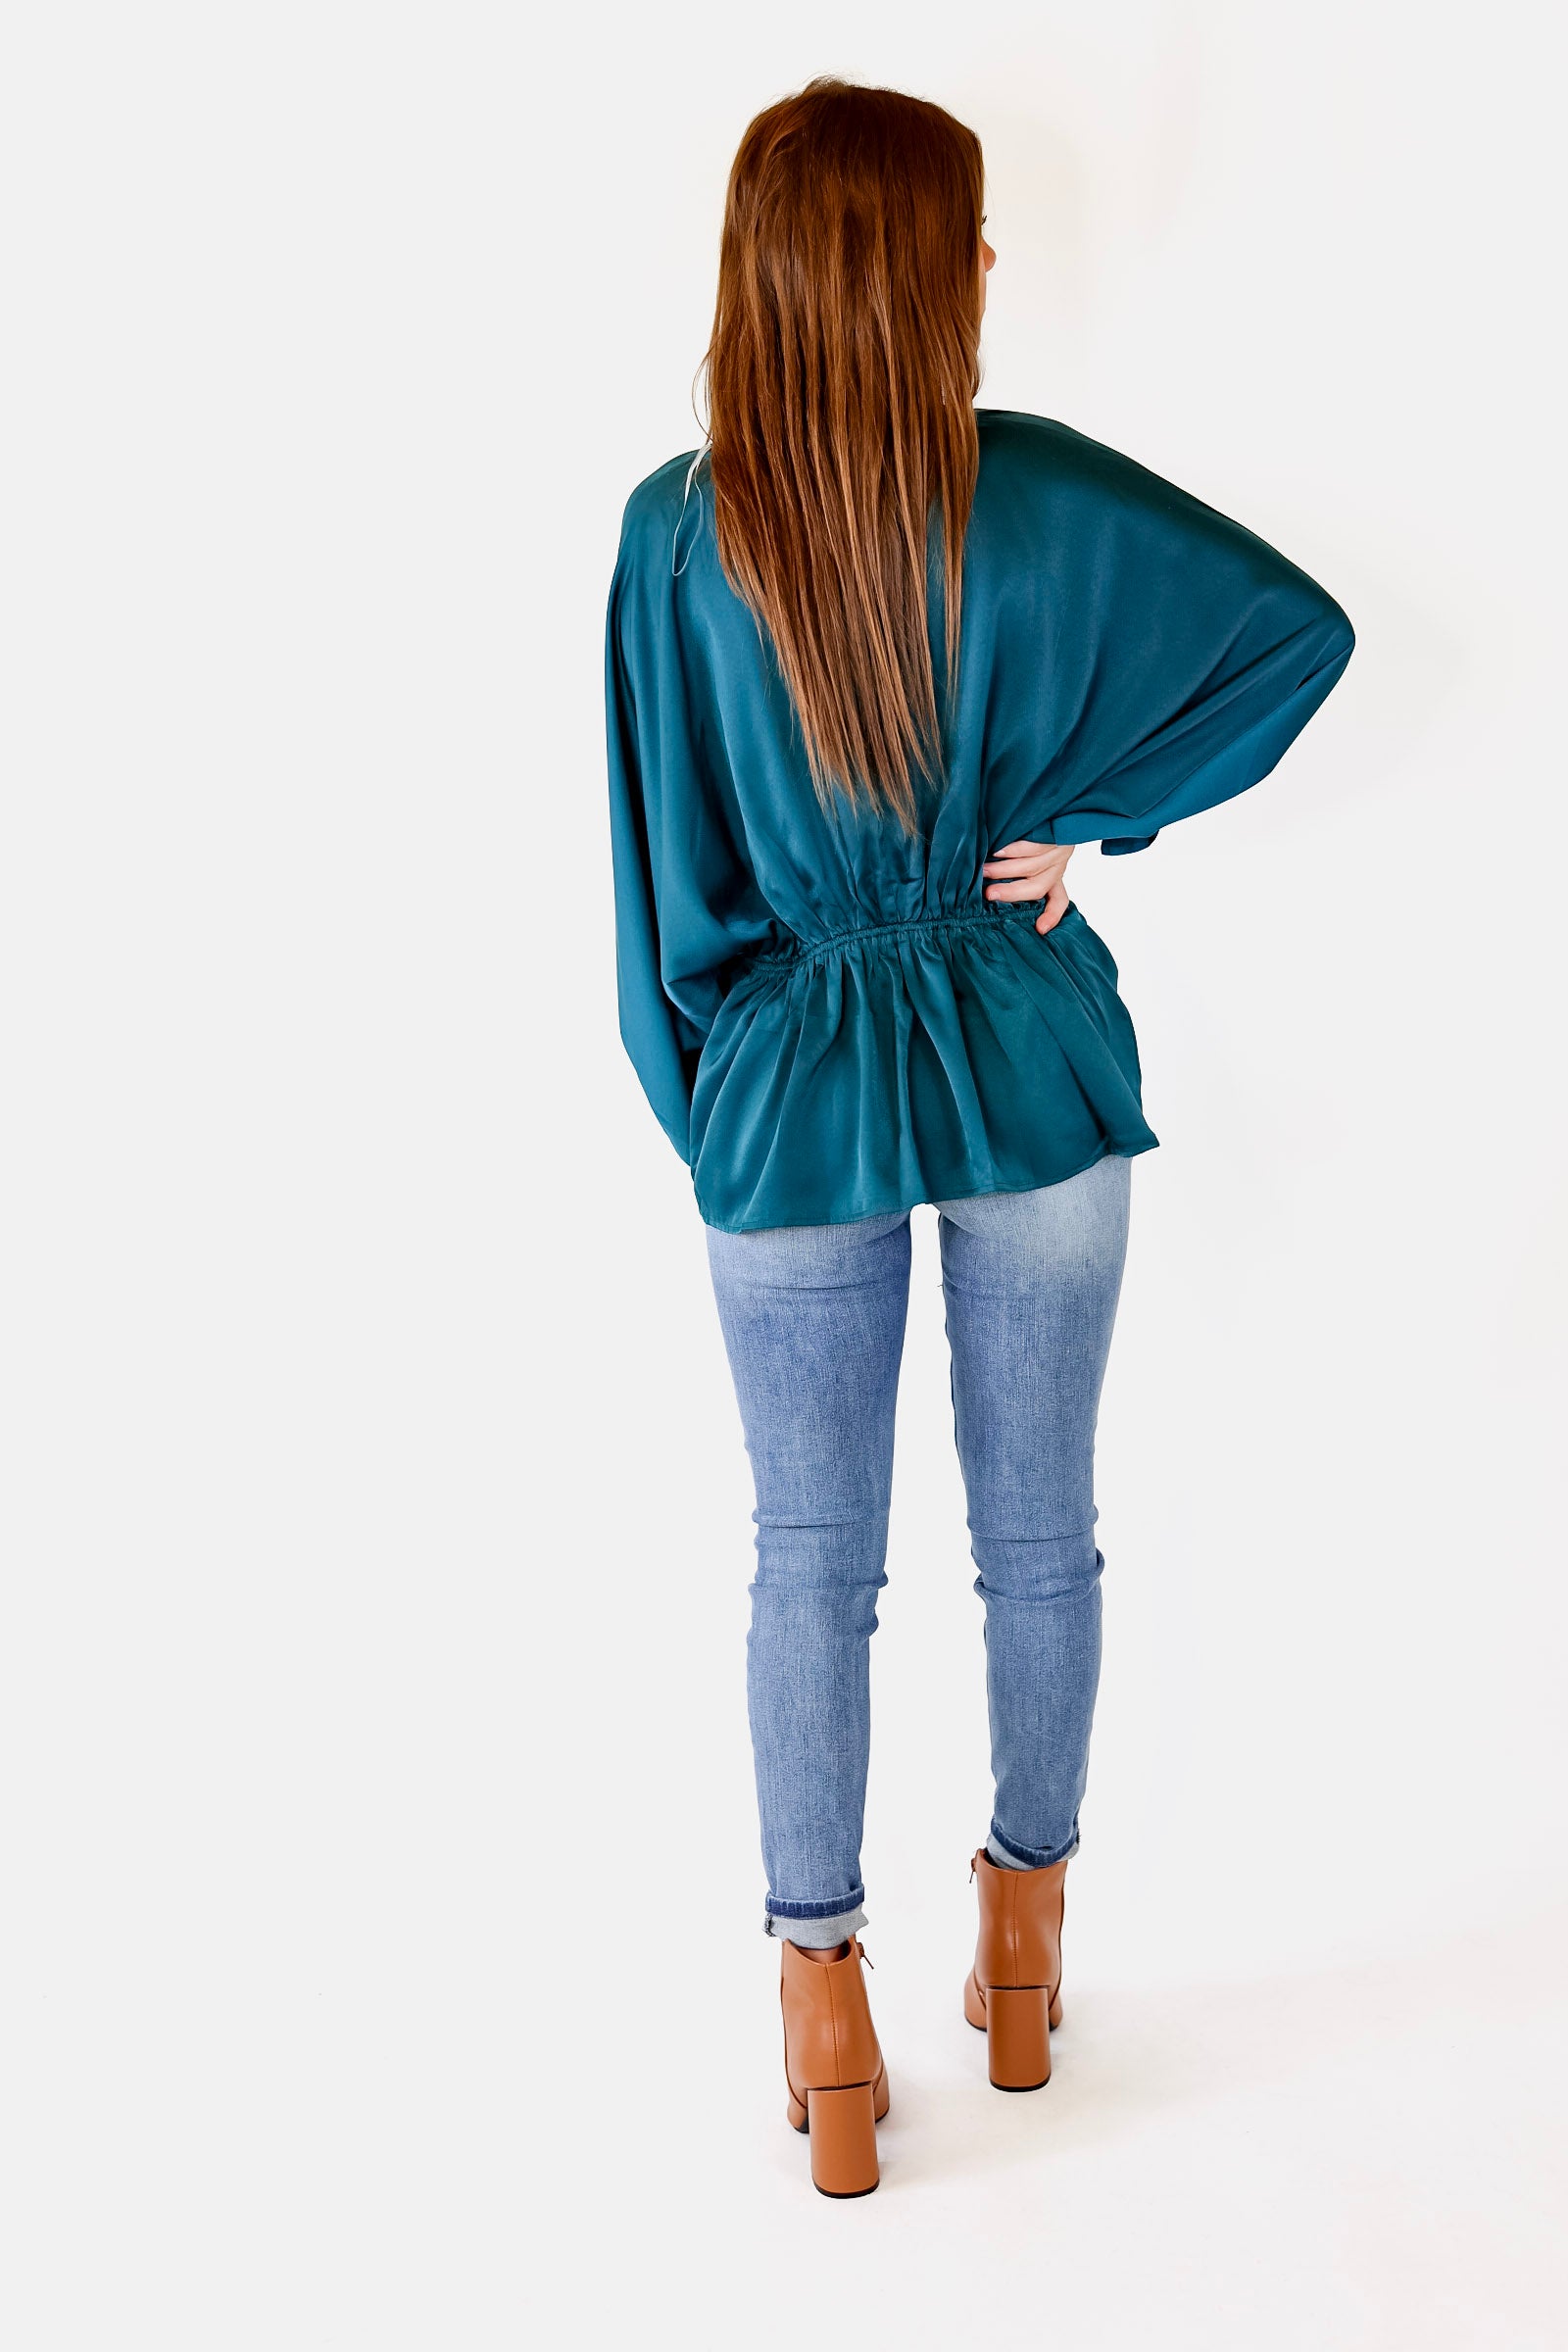 Stating Facts Satin Top with Drawstring Waist in Teal - Giddy Up Glamour Boutique